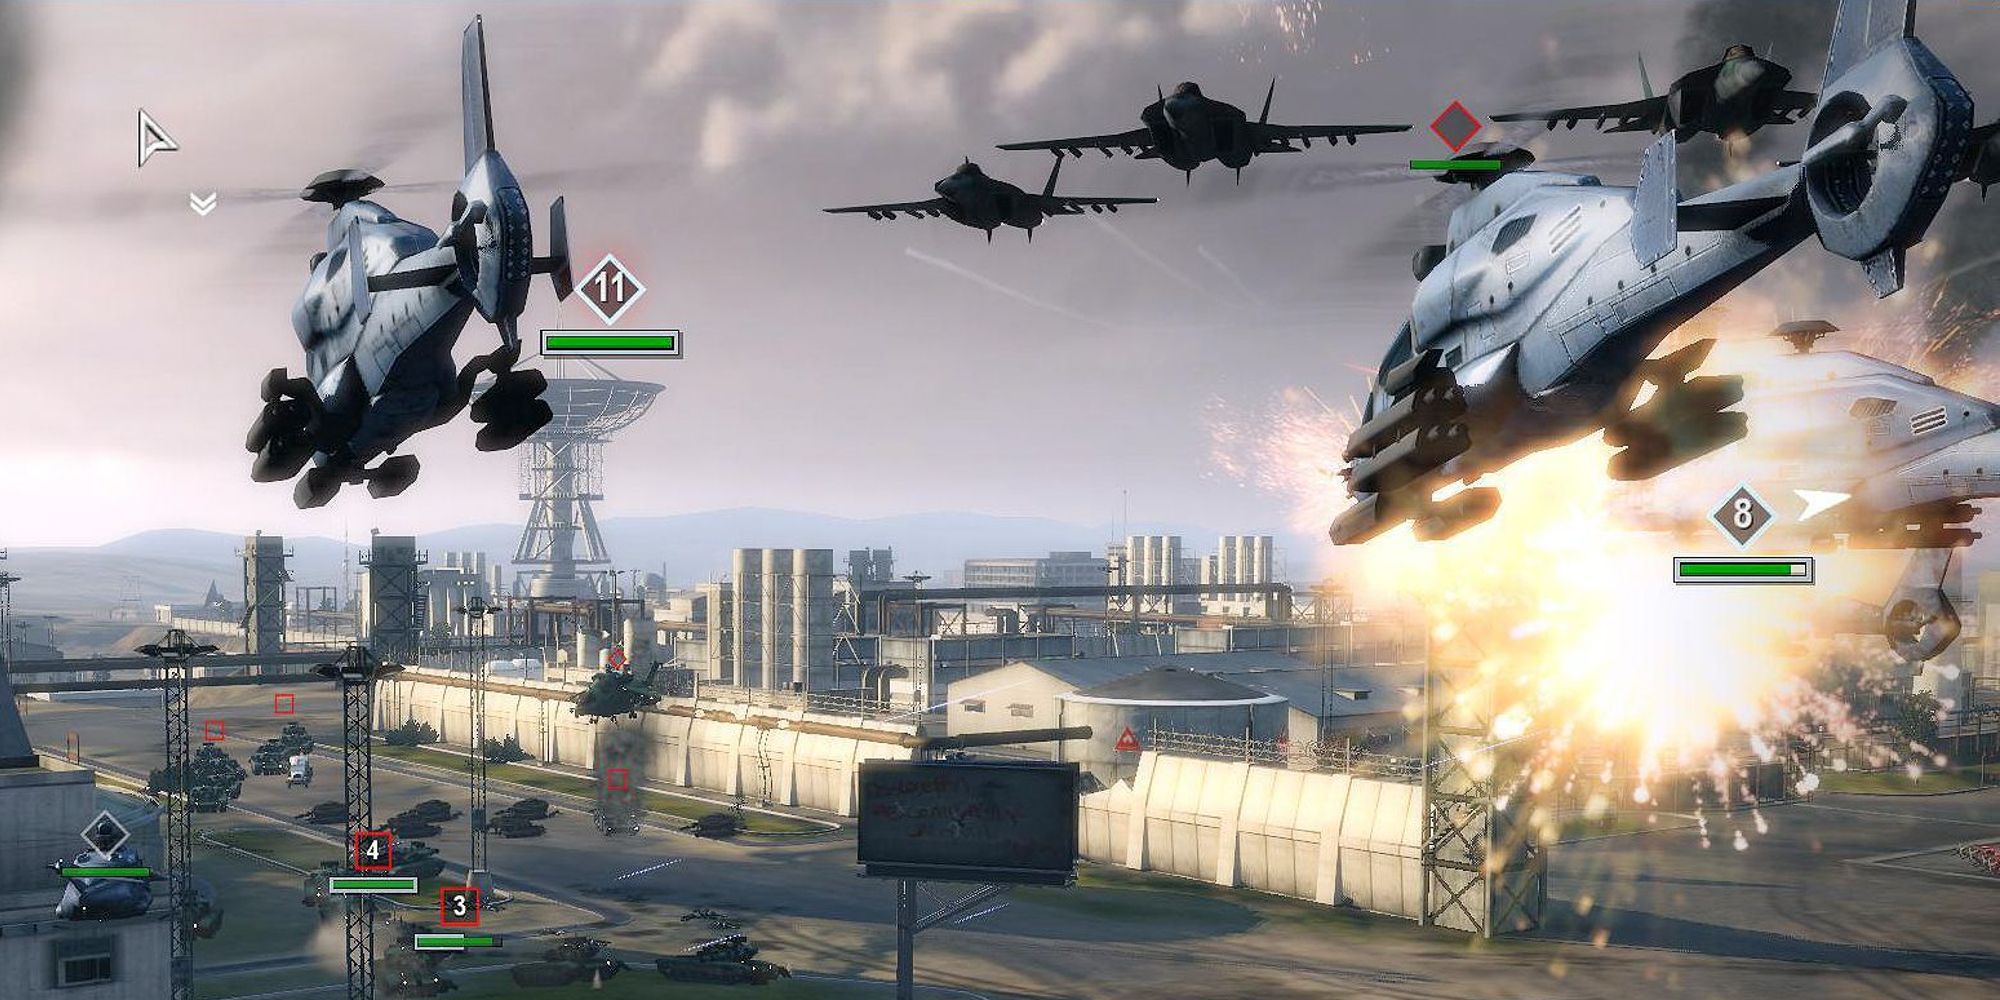 Helicopters fight enemy ground forces in Tom Clancy's EndWar (2009)